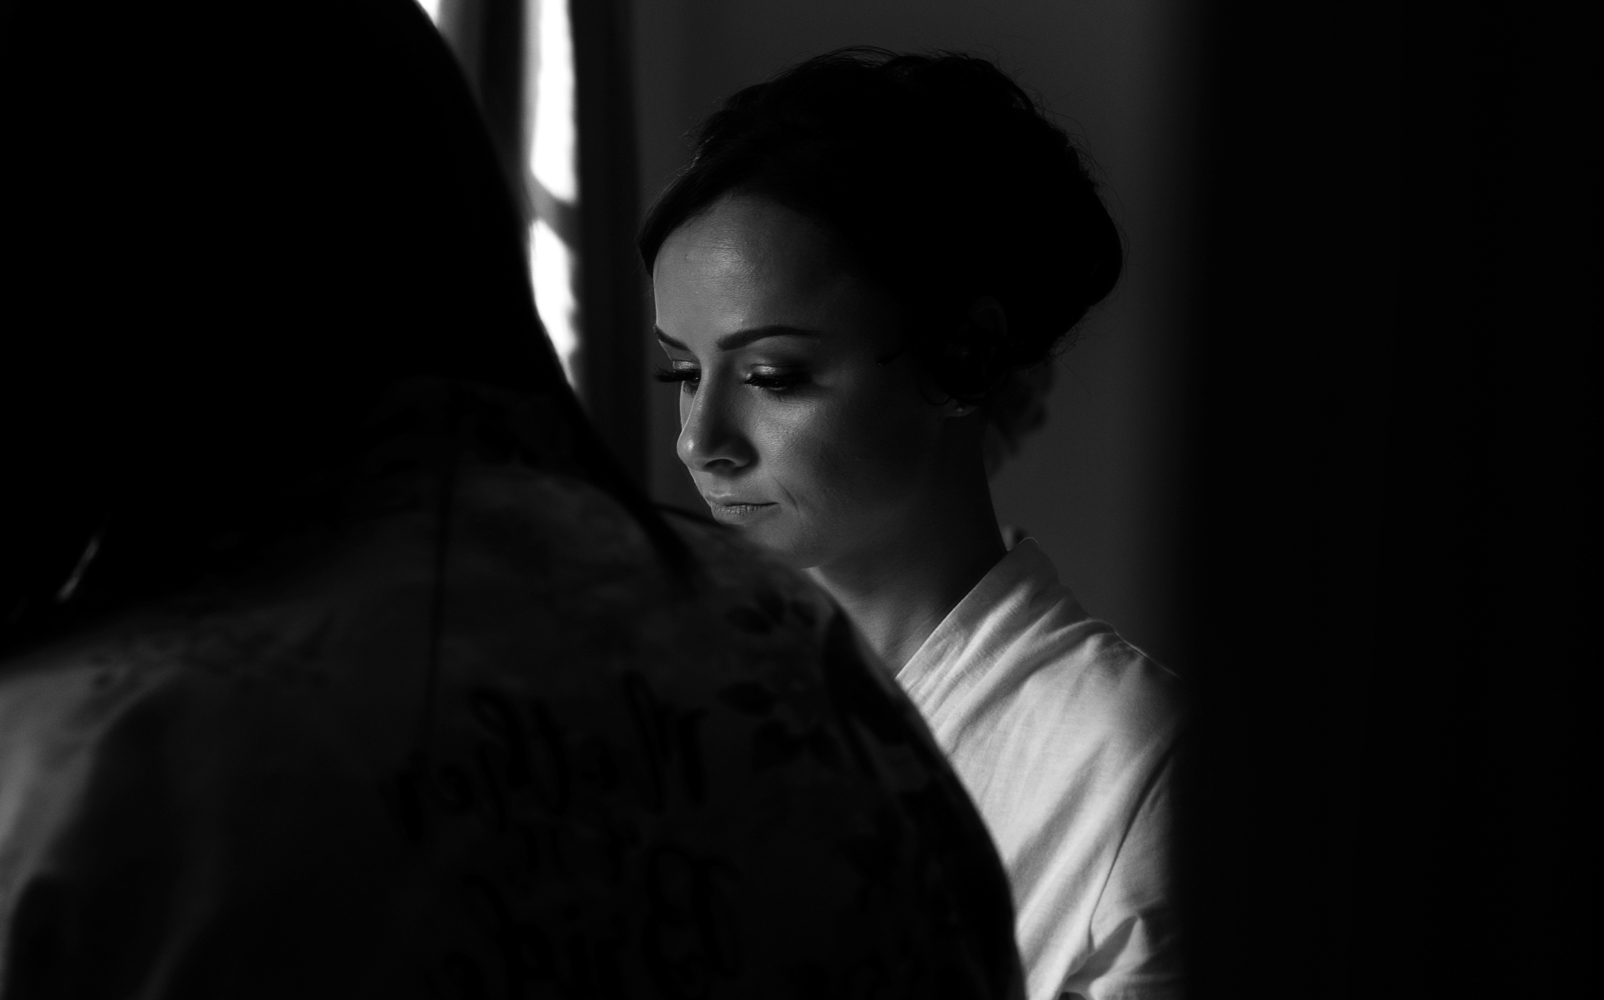 A thoughtful moment for the bride during morning preparations